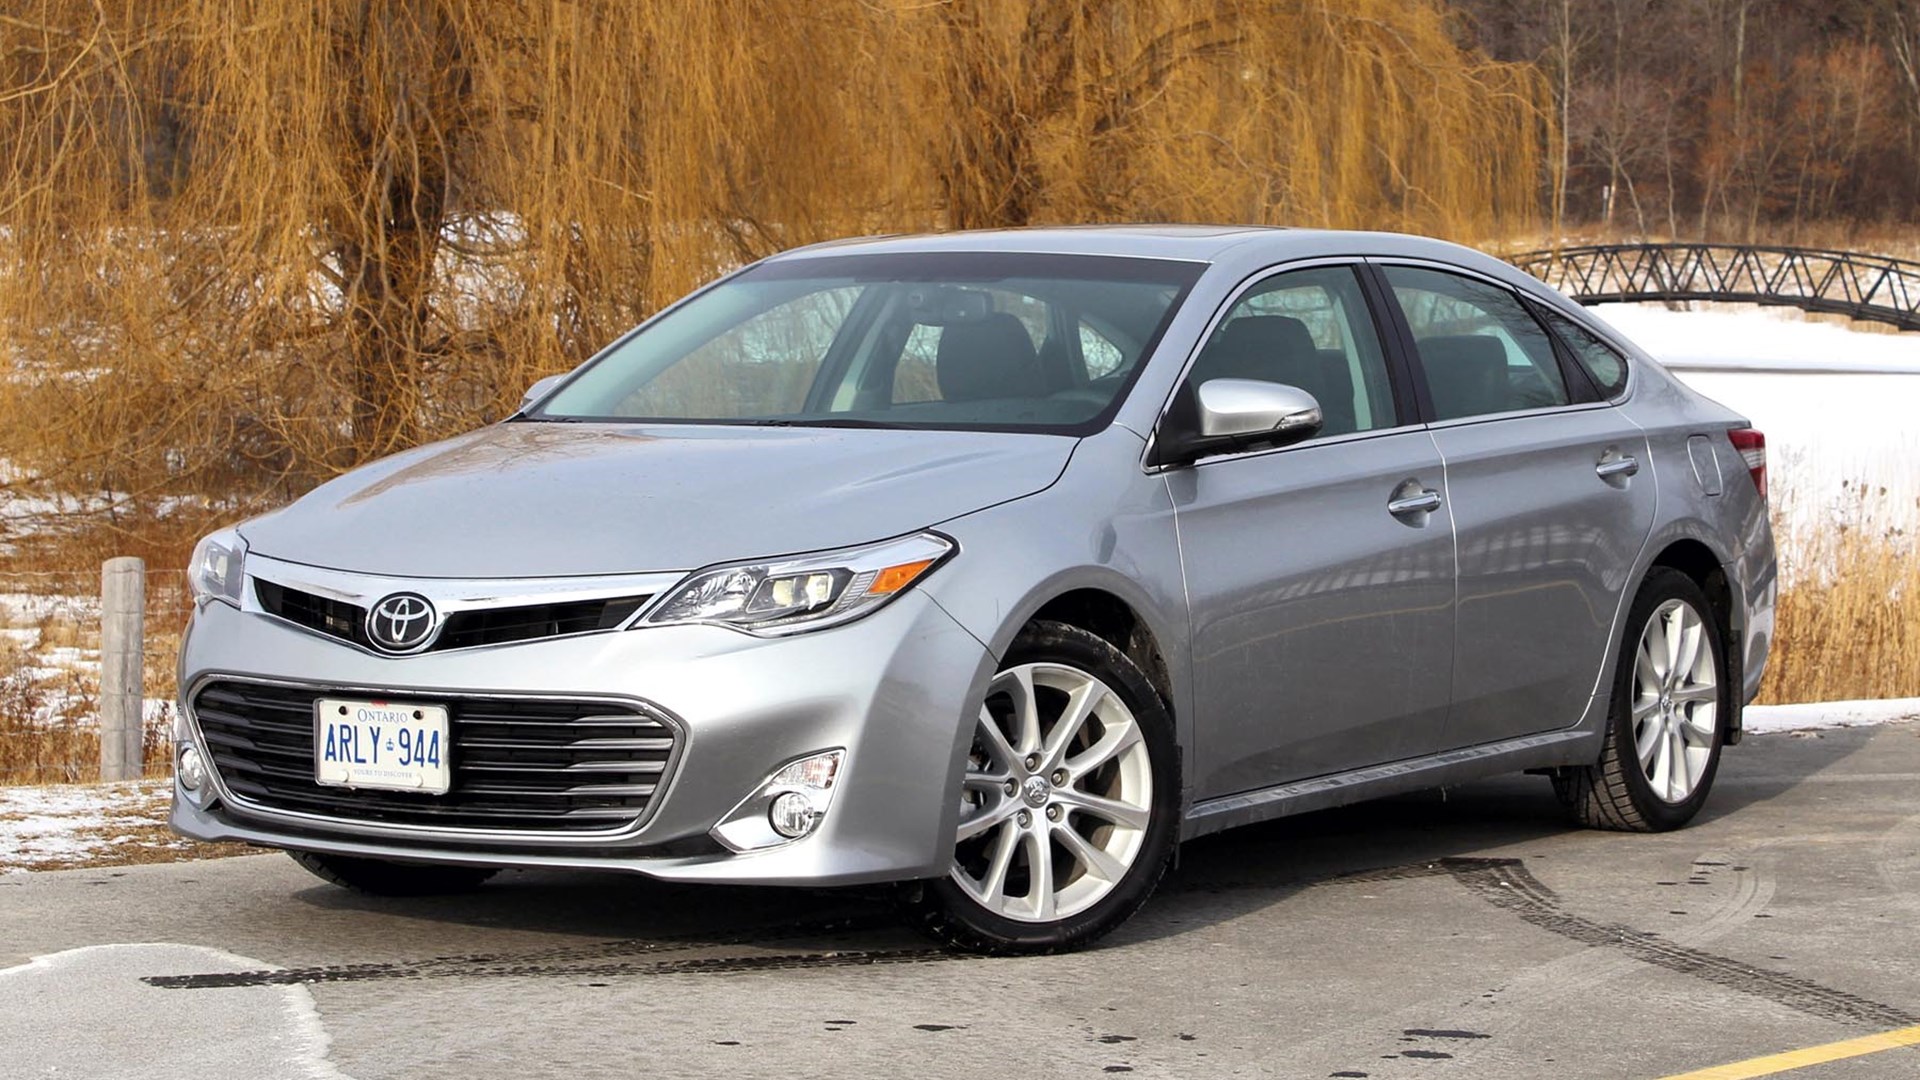 Toyota Avalon 2015 vs. Lexus ES 350: Which One Is Better?